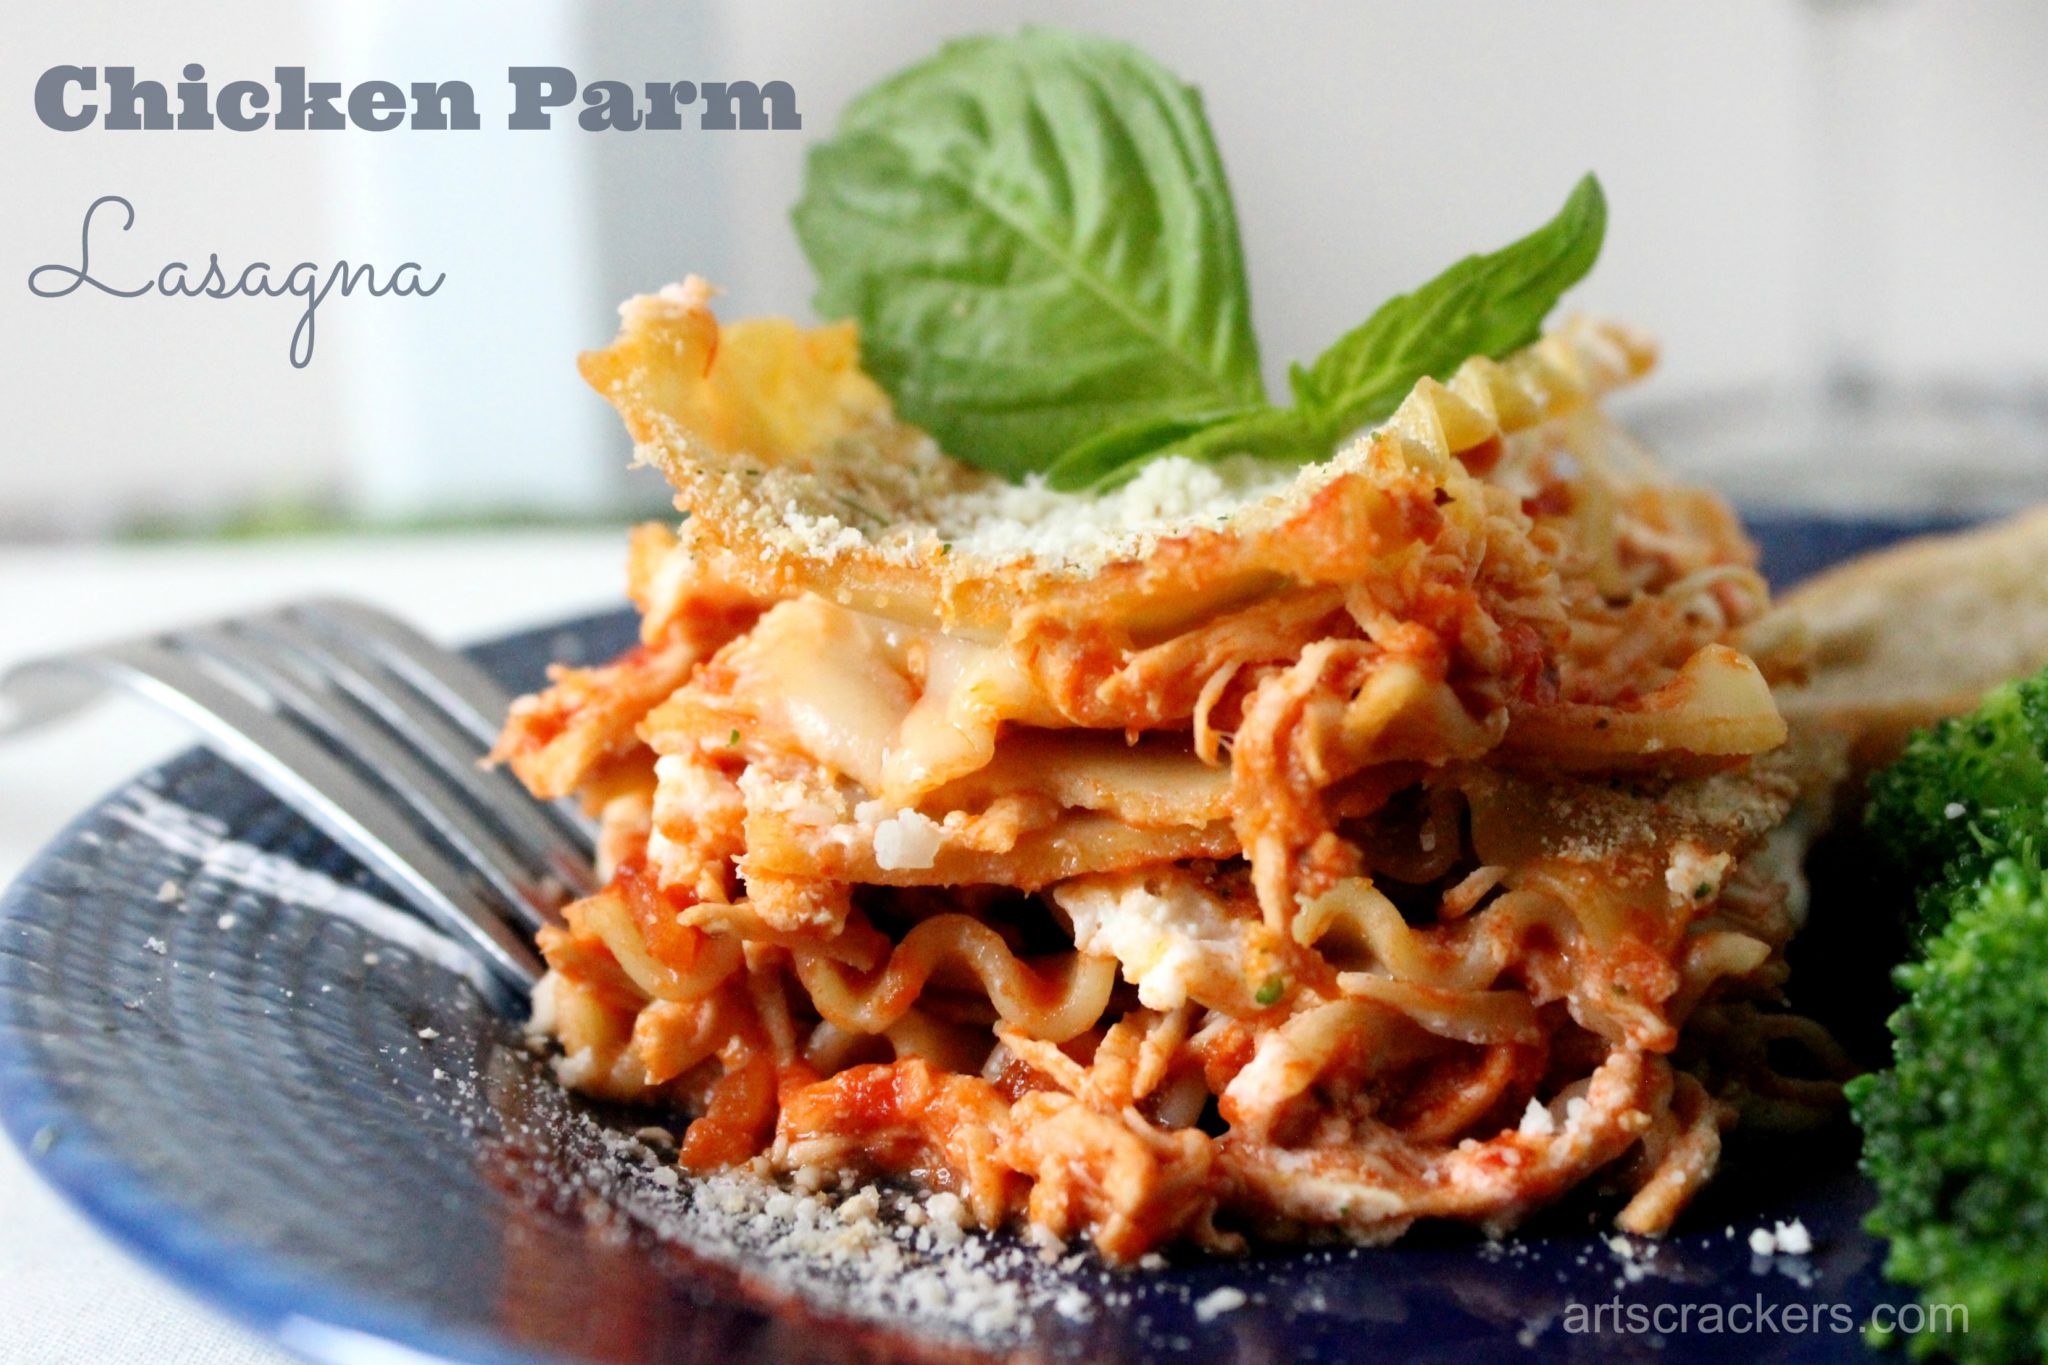 Chicken Parm Lasagna. Click the picture to get the recipe.